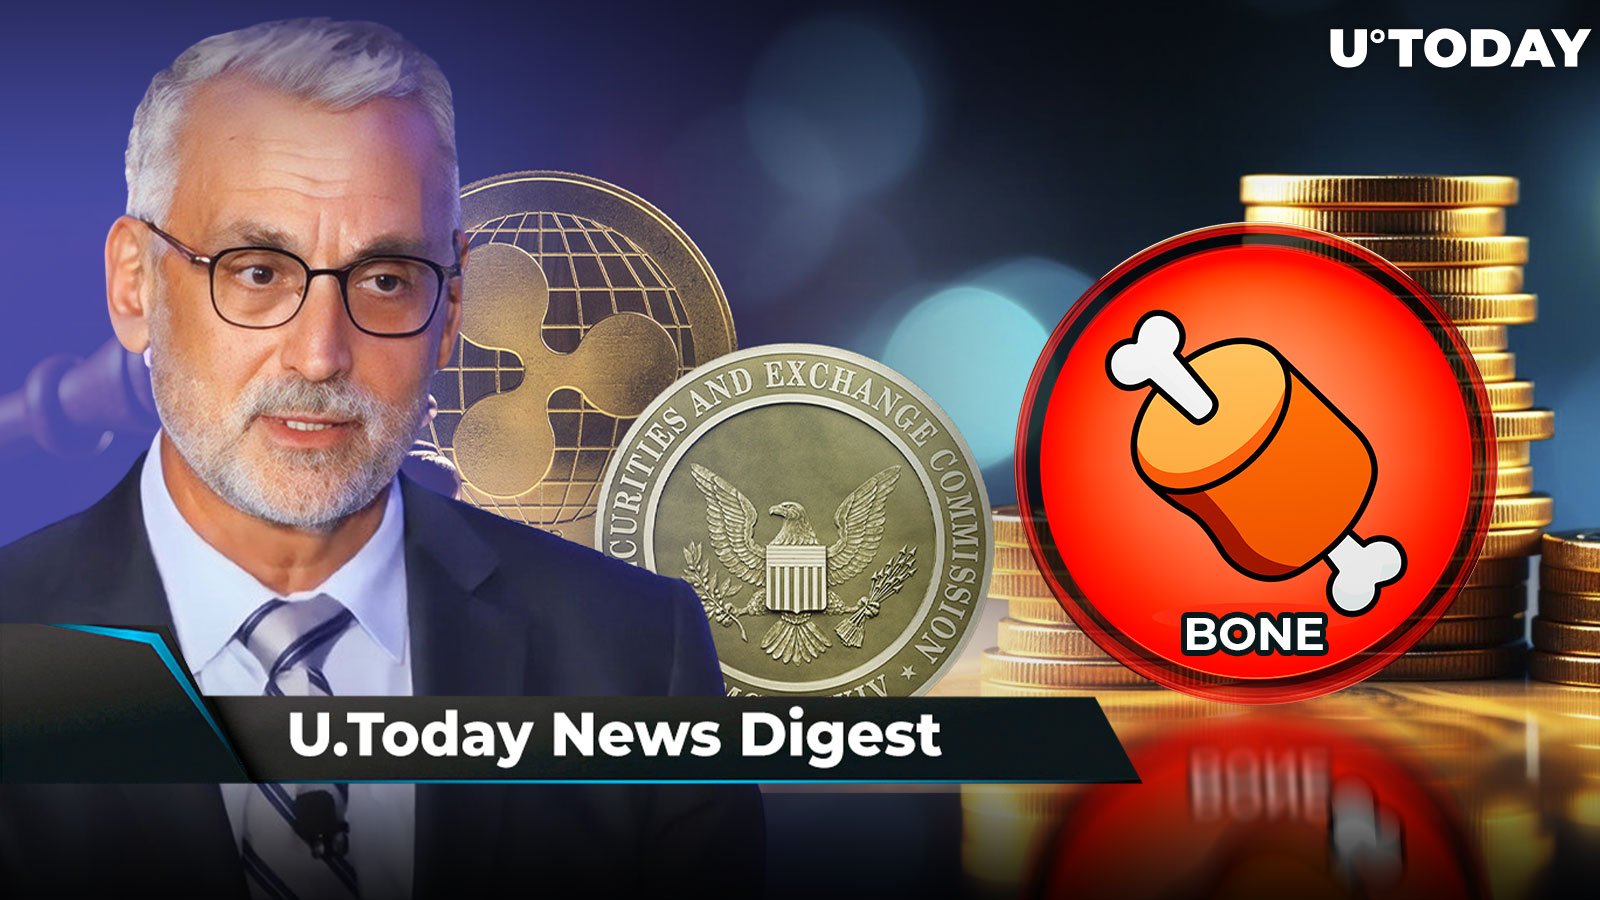 SHIB Team Member Shares Initial Reason Behind Creation of BONE, Ripple CLO Teases Resolution of XRP Case, Max Keizer Says Bitcoin's 'Divine Candle' is Coming: U.Today's Crypto News Digest